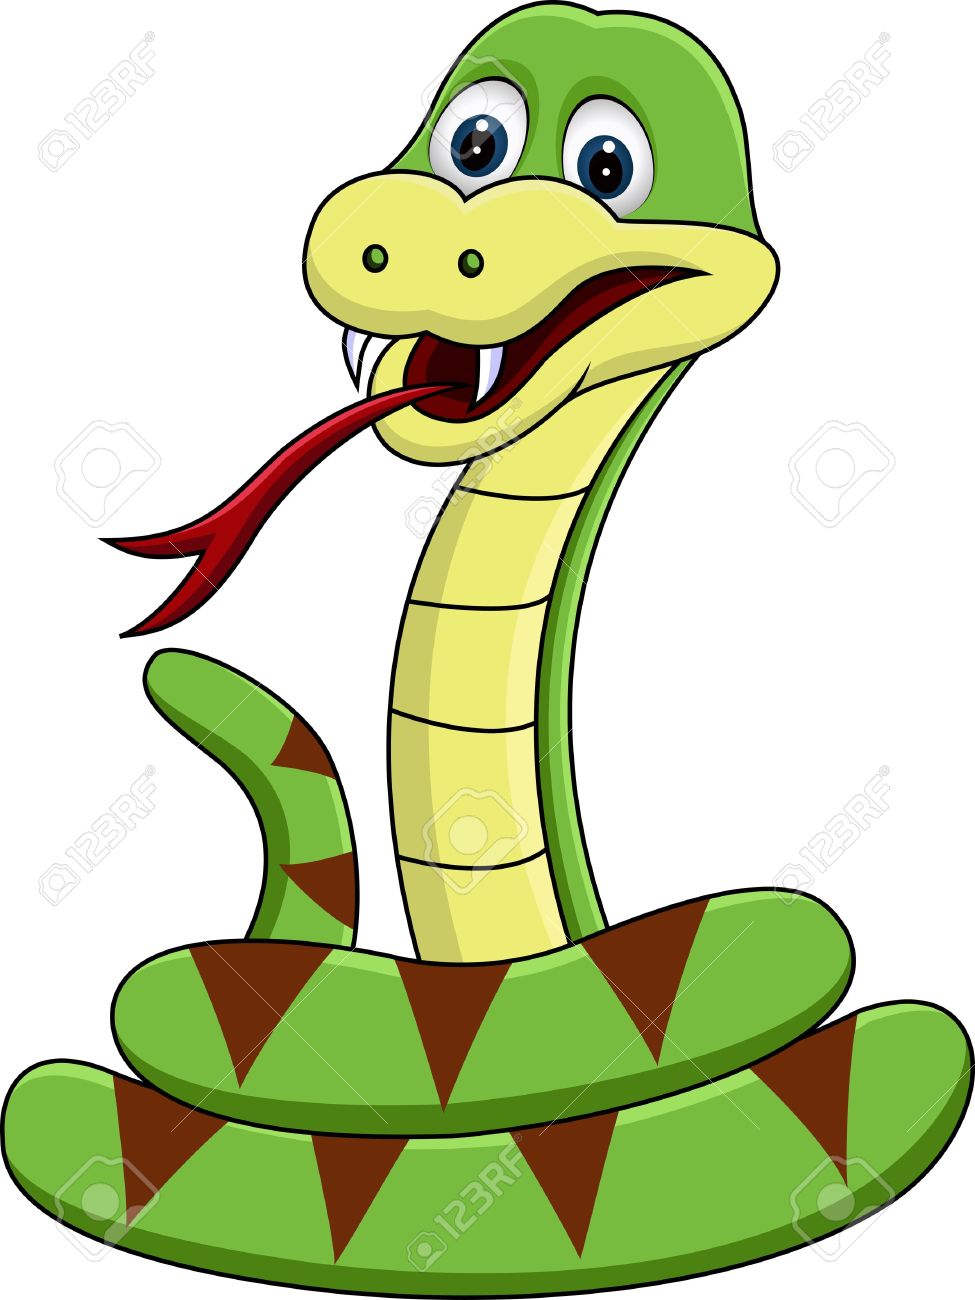 Clipart snake. Panda free images snakeclipart